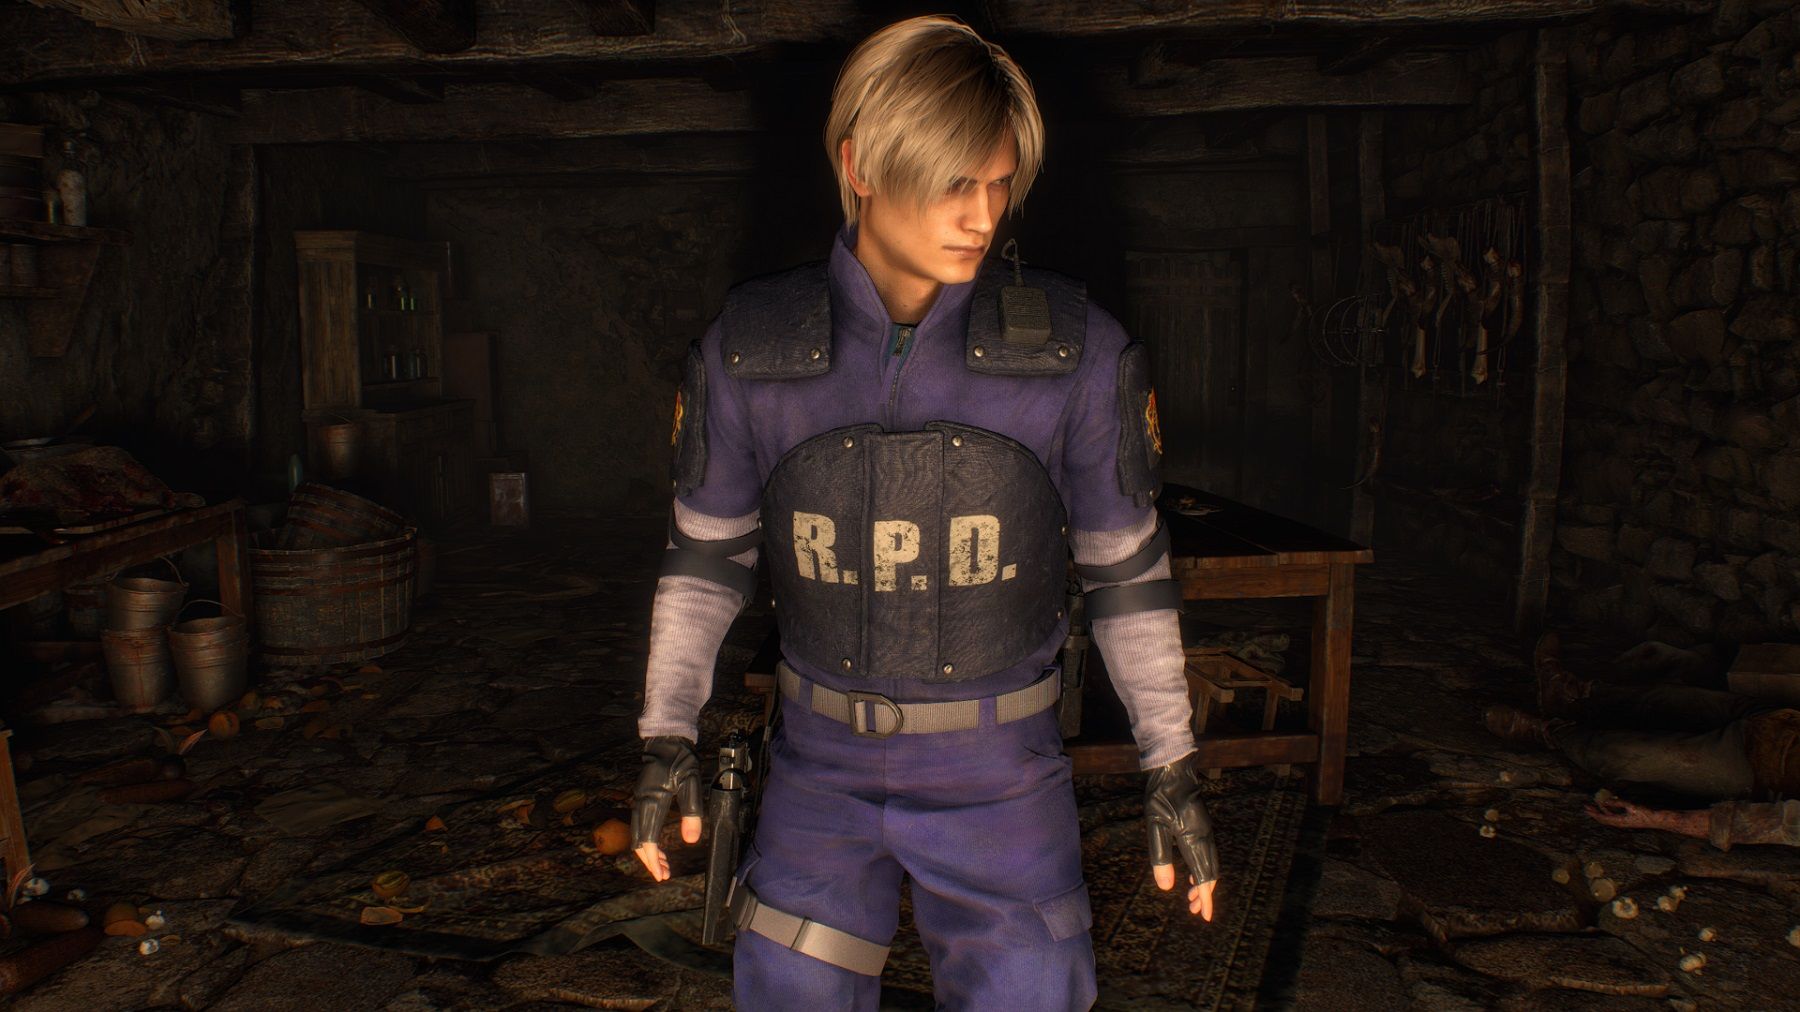 Screenshot from the Resident Evil 4 remake showing Leon Kennedy in his RE2 RPD uniform.